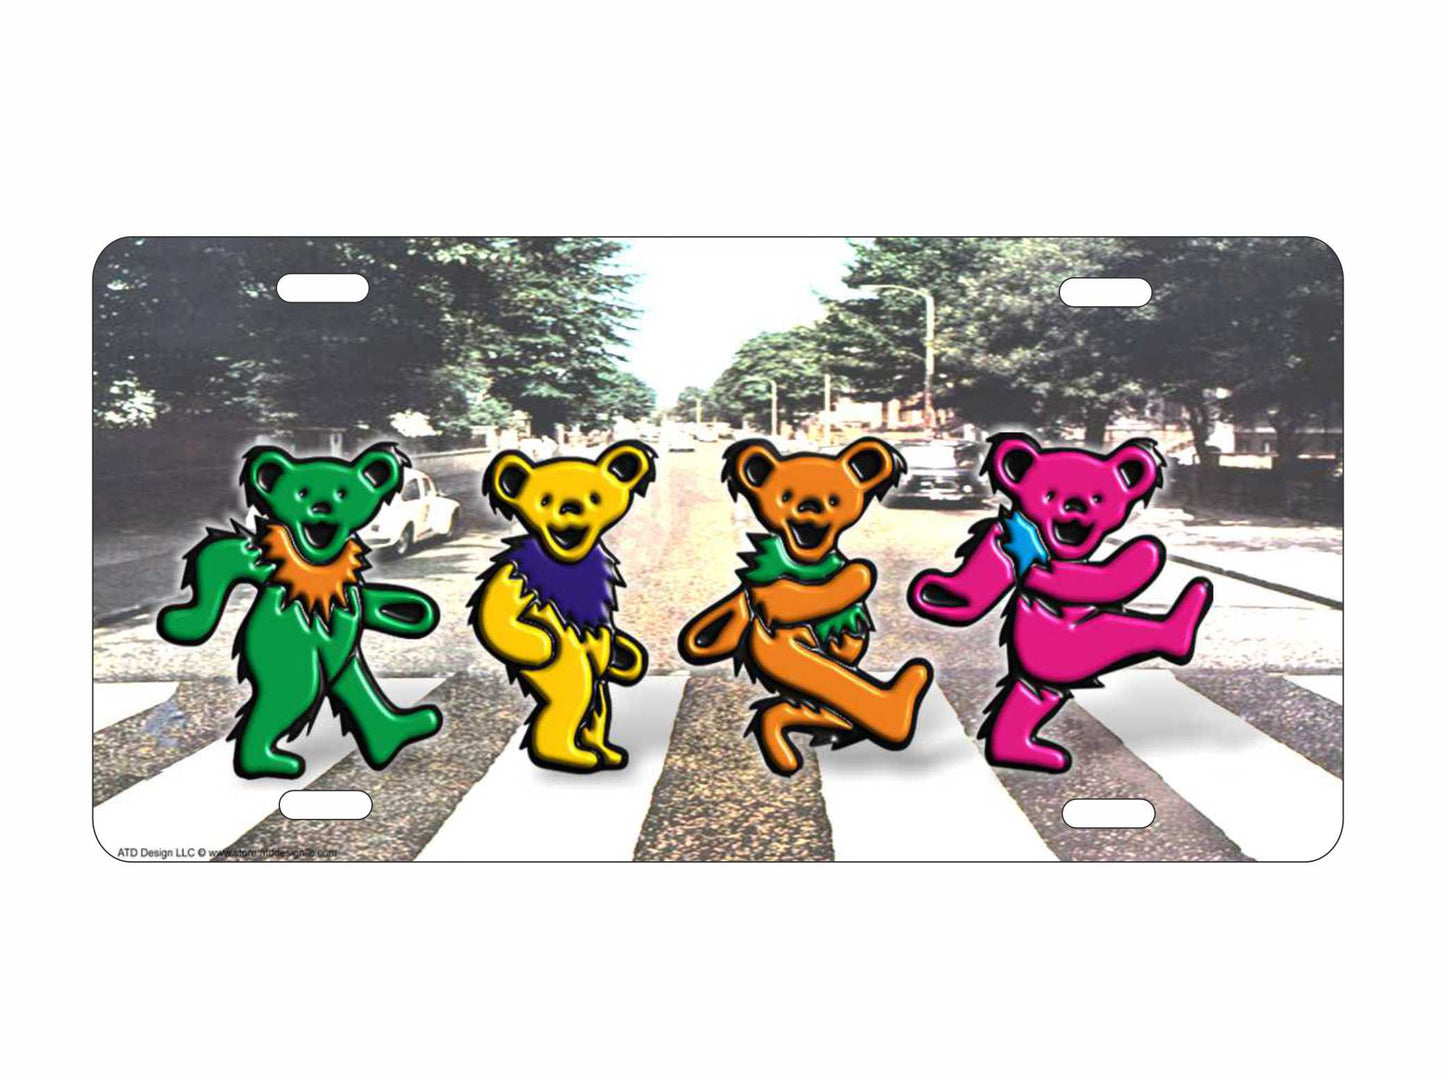 Abbey Road dancing bears novelty front license plate Decorative aluminum vanity car tag